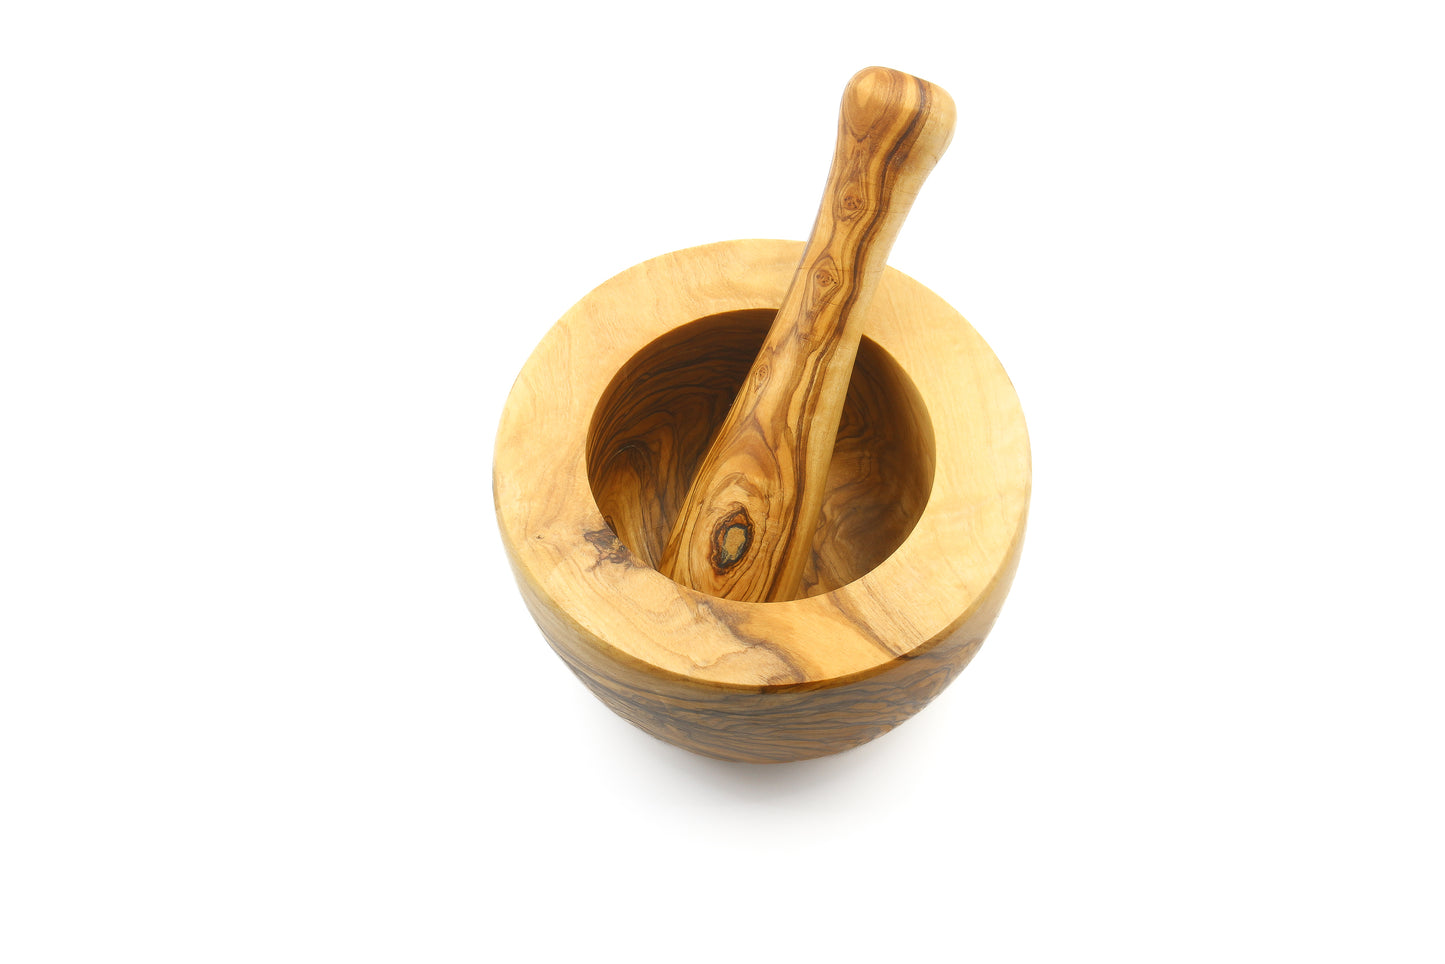 Natural olive wood mortar and pestle for your kitchen